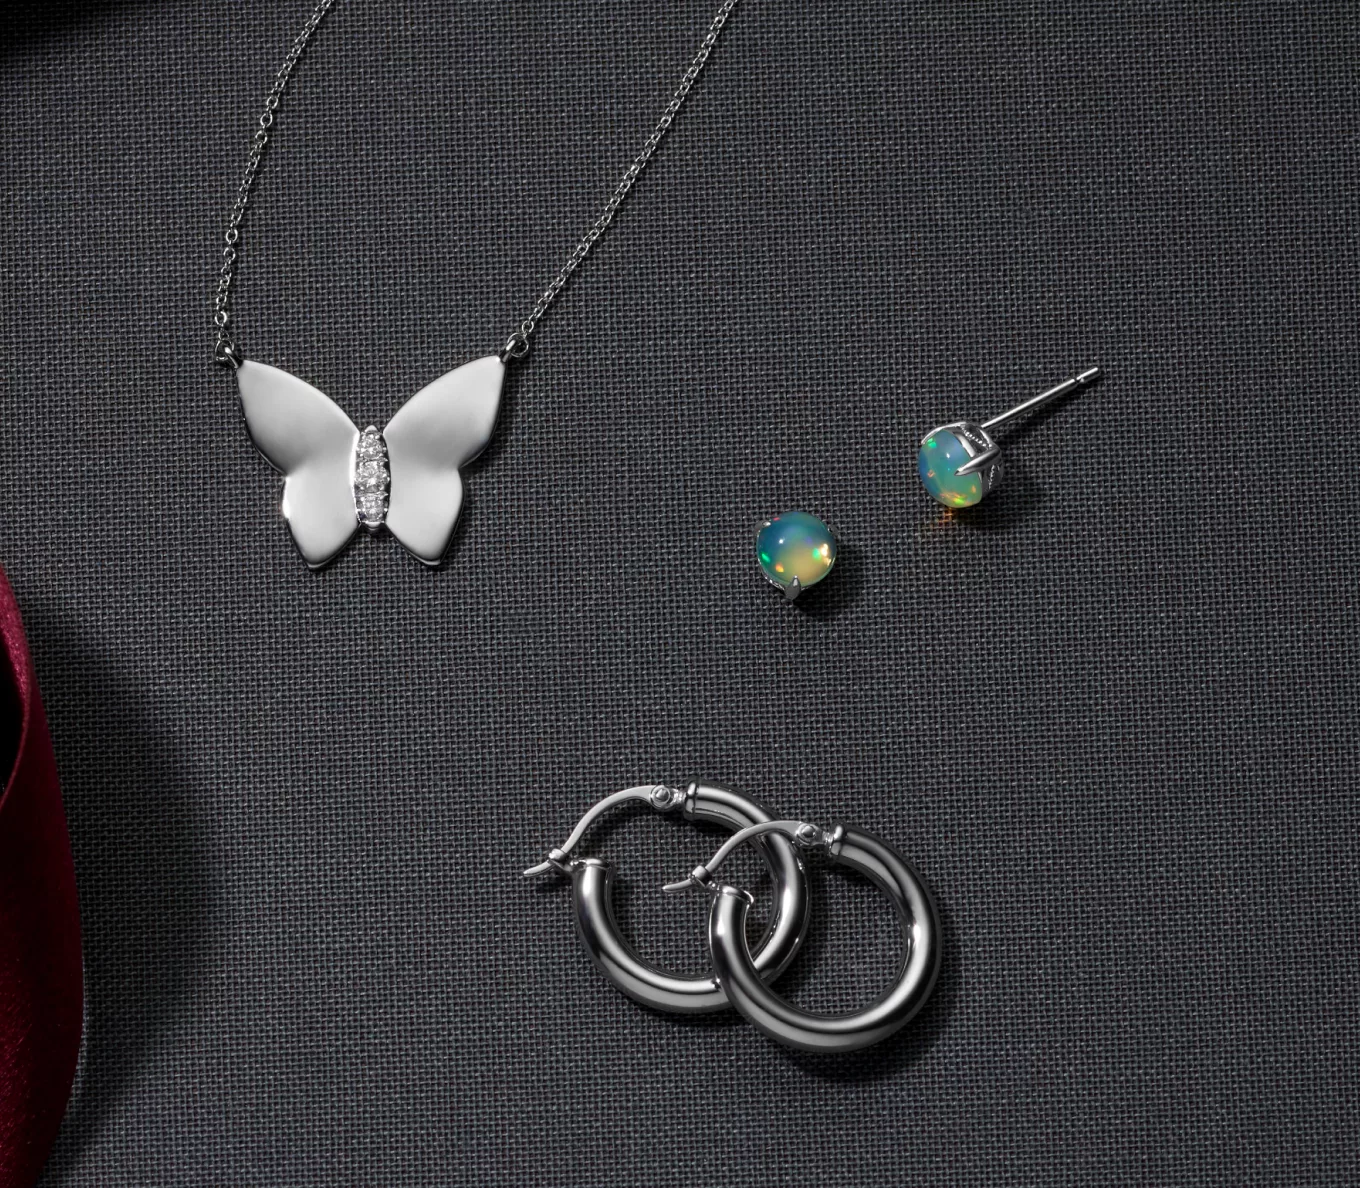 jewelry gifts under $250: butterfly necklace, opal earrings, hoop earrings. Diamond Butterfly Pendant in Sterling Silver
Natural diamond accents decorate the middle of this sterling silver butterfly pendant for a touch of beautiful sparkle. A cable chain with a spring clasp keeps this stylish necklace secure. Classic Sterling Silver Hoop Earrings
Add instant personality to any outfit with these sterling silver hoop earrings. They feature a secure yet easy lever back and rhodium plating to prevent tarnishing. Imogen Opal Studs
These earrings put the spotlight on the iridescent beauty of natural opals. Crafted in quality sterling silver, they feature milgrain detail around the profile. Clean natural opal gently in warm water with mild detergent and a soft toothbrush or cloth. Avoid bleach, chemicals and cleaners, and rapid temperature changes.